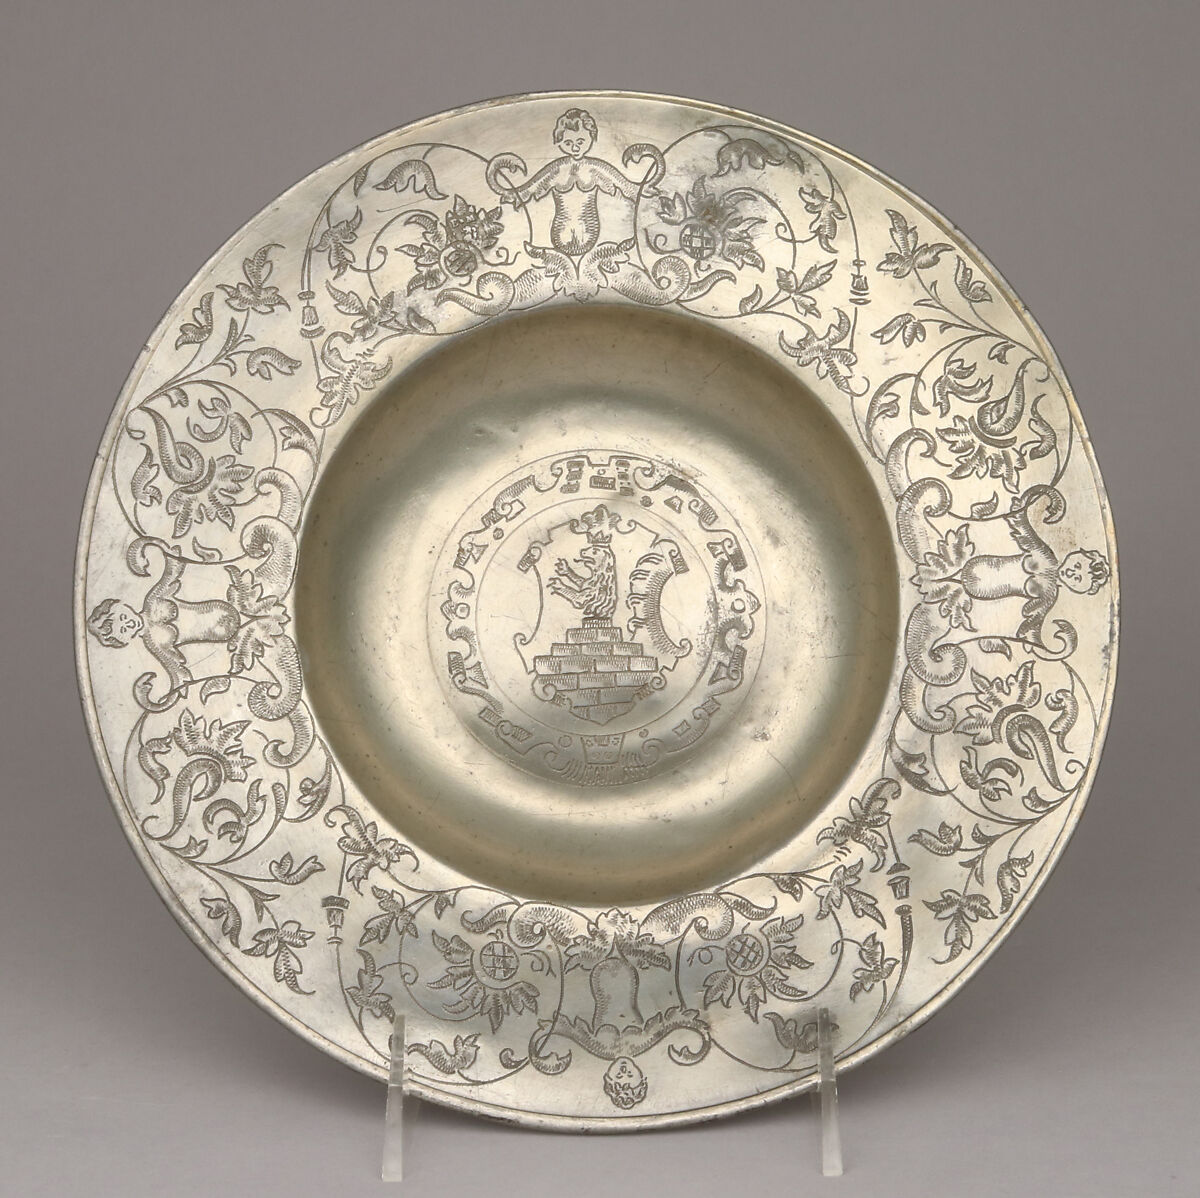 Plate, Pewter, possibly Swiss 